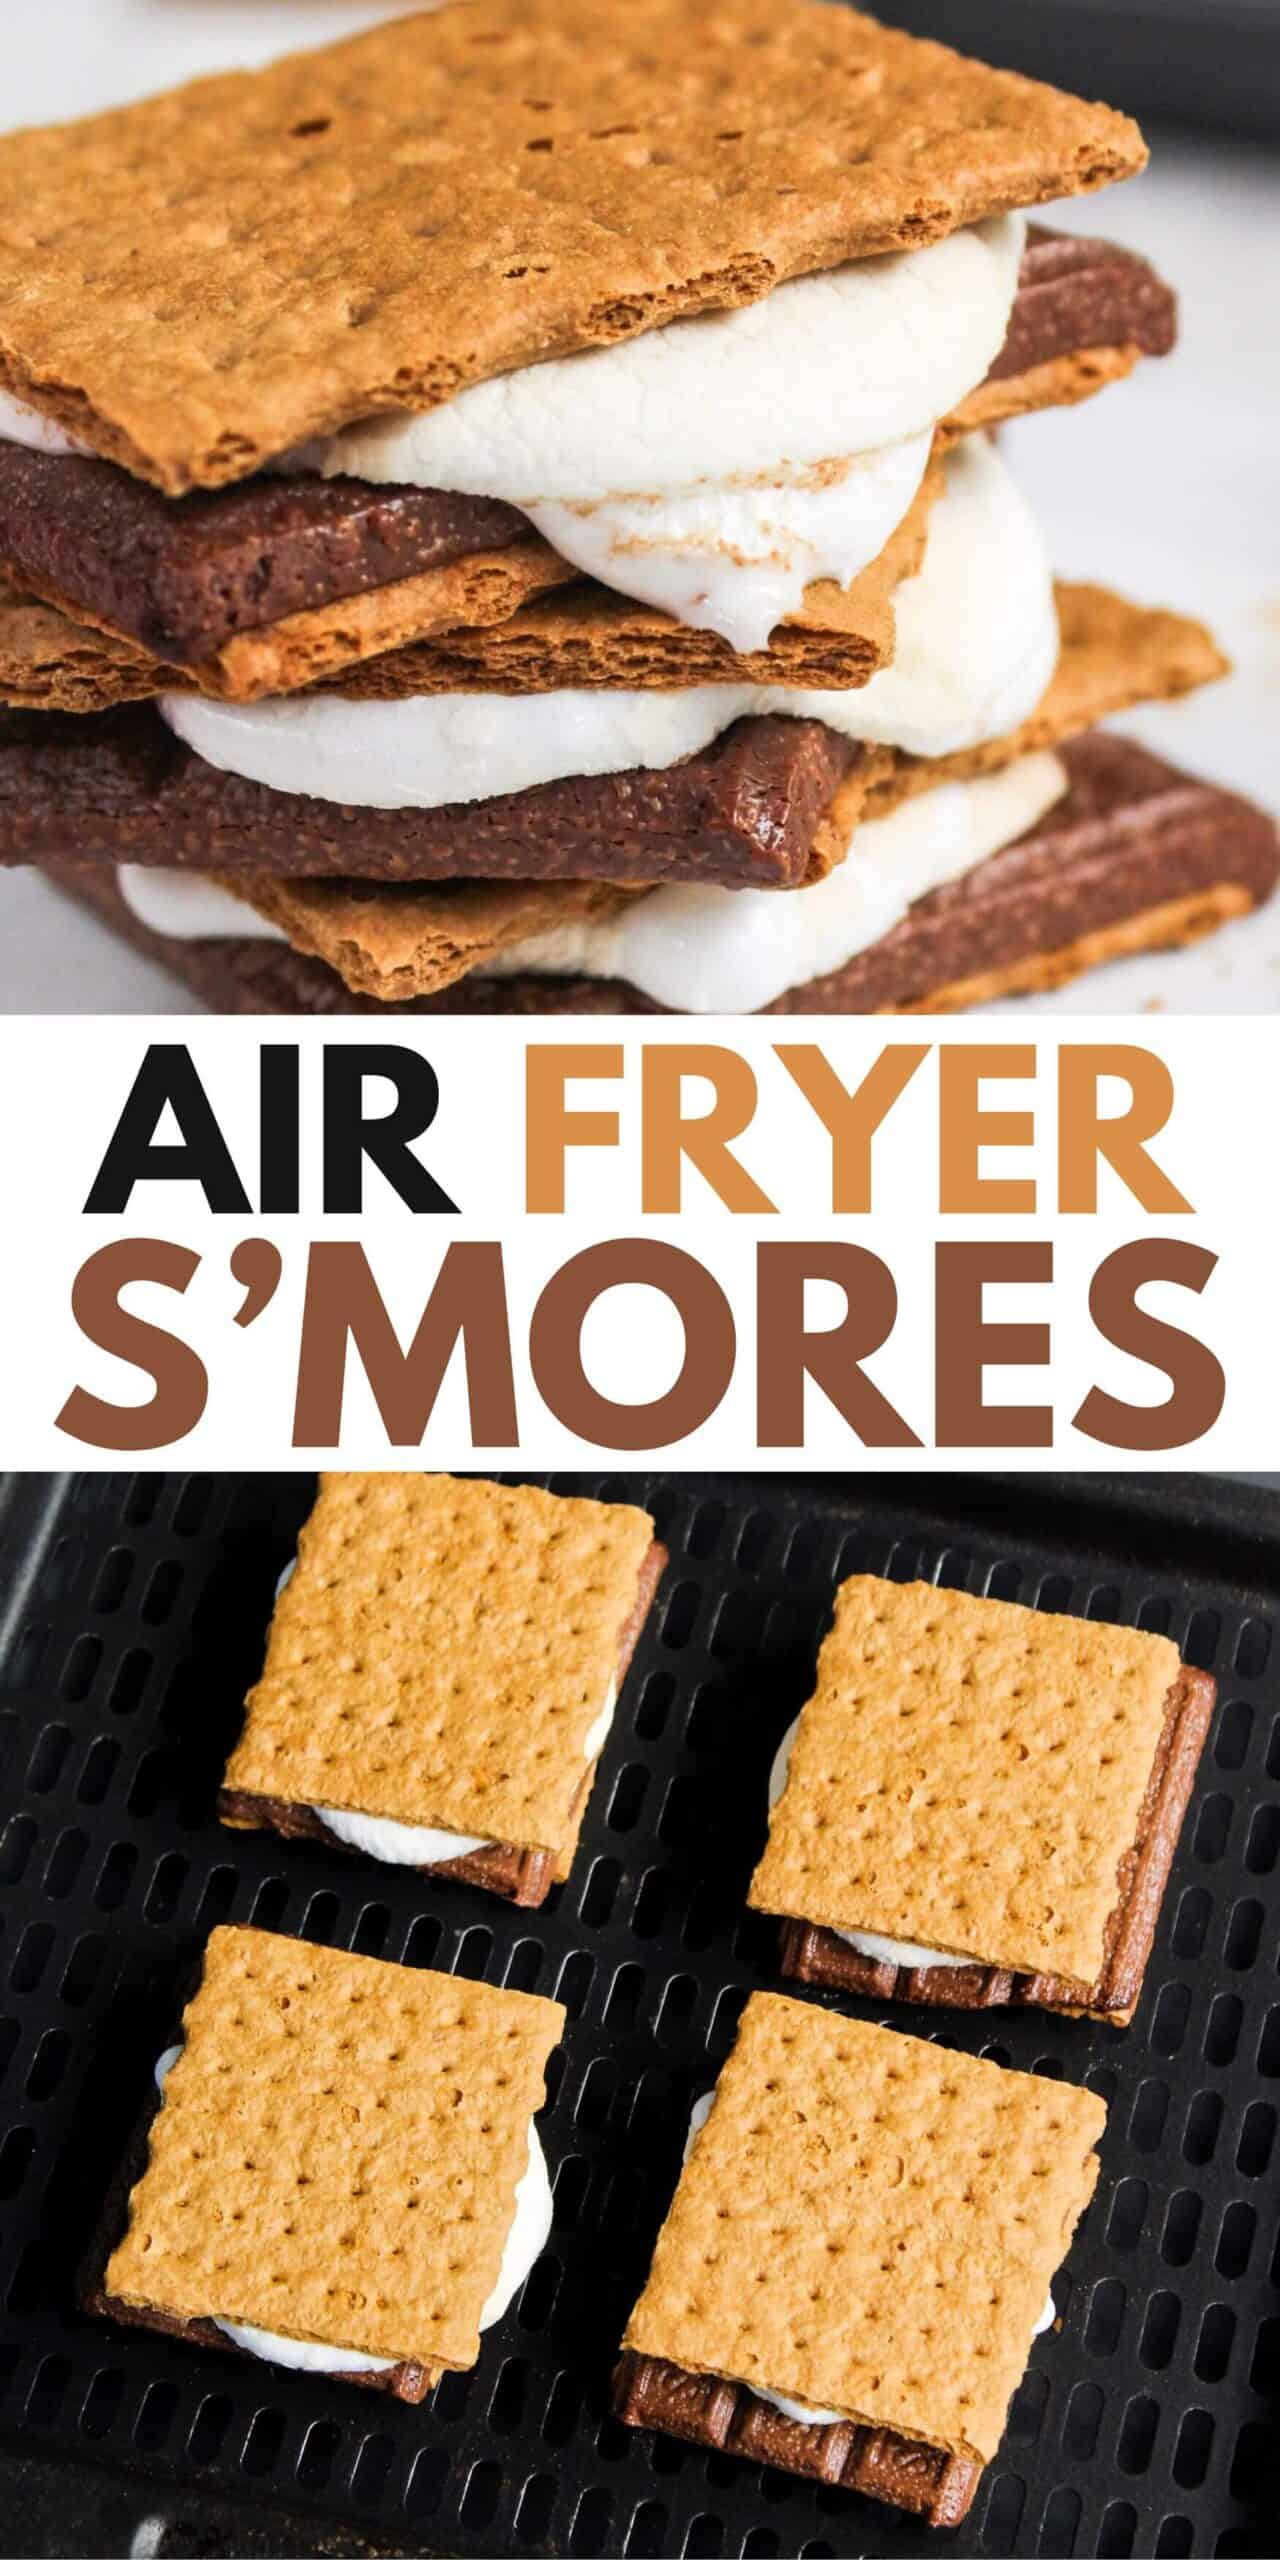 Air fryer s'mores with the text air fryer s'mores.